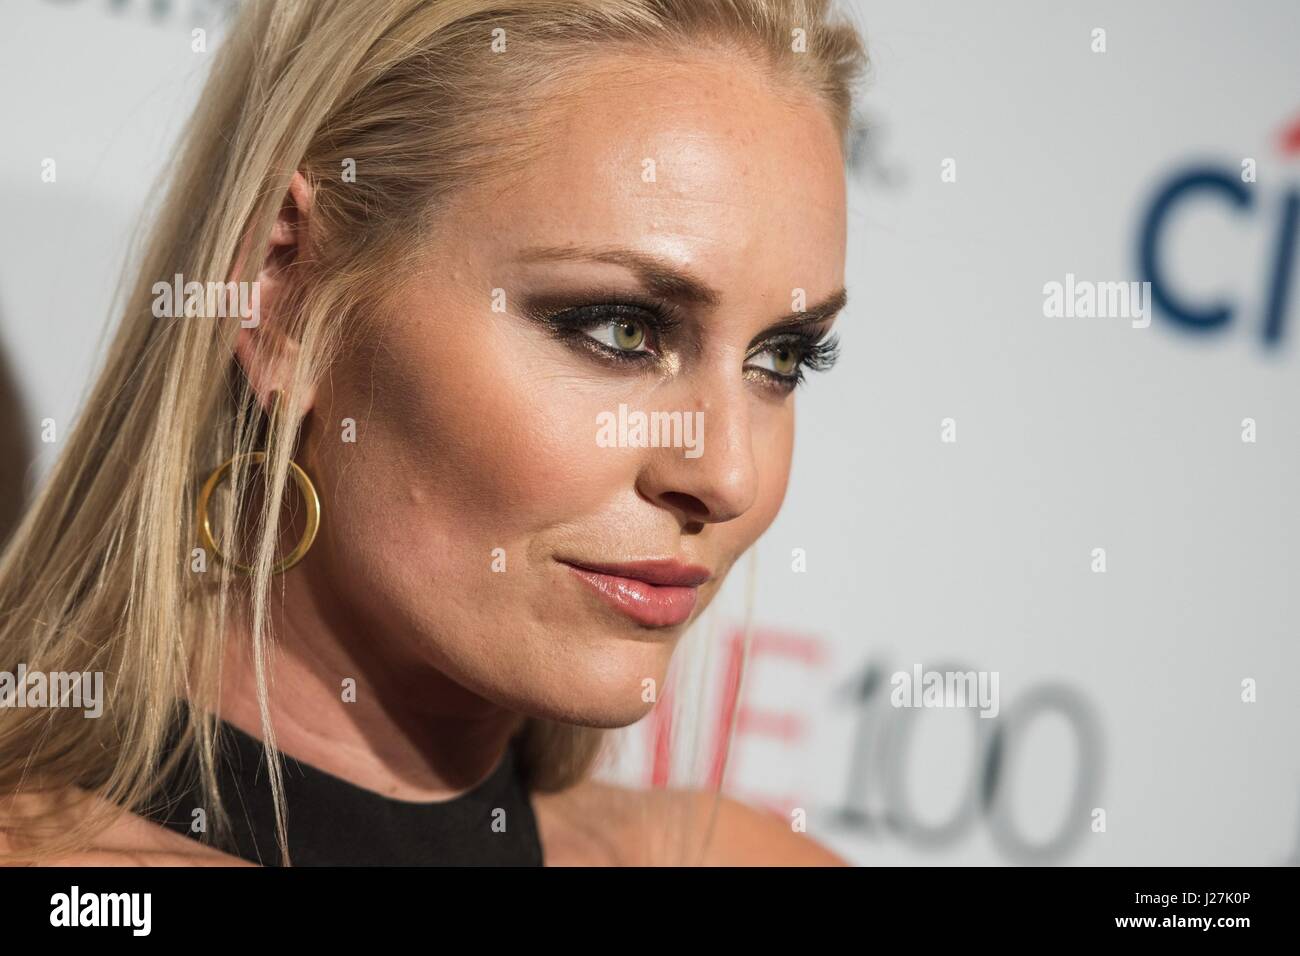 New York, NY, USA. 25th Apr, 2017. Lindsey Vonn at arrivals for TIME 100 Gala Dinner 2017, Jazz at Lincoln Center's Frederick P. Rose Hall, New York, NY April 25, 2017. Credit: Steven Ferdman/Everett Collection/Alamy Live News Stock Photo